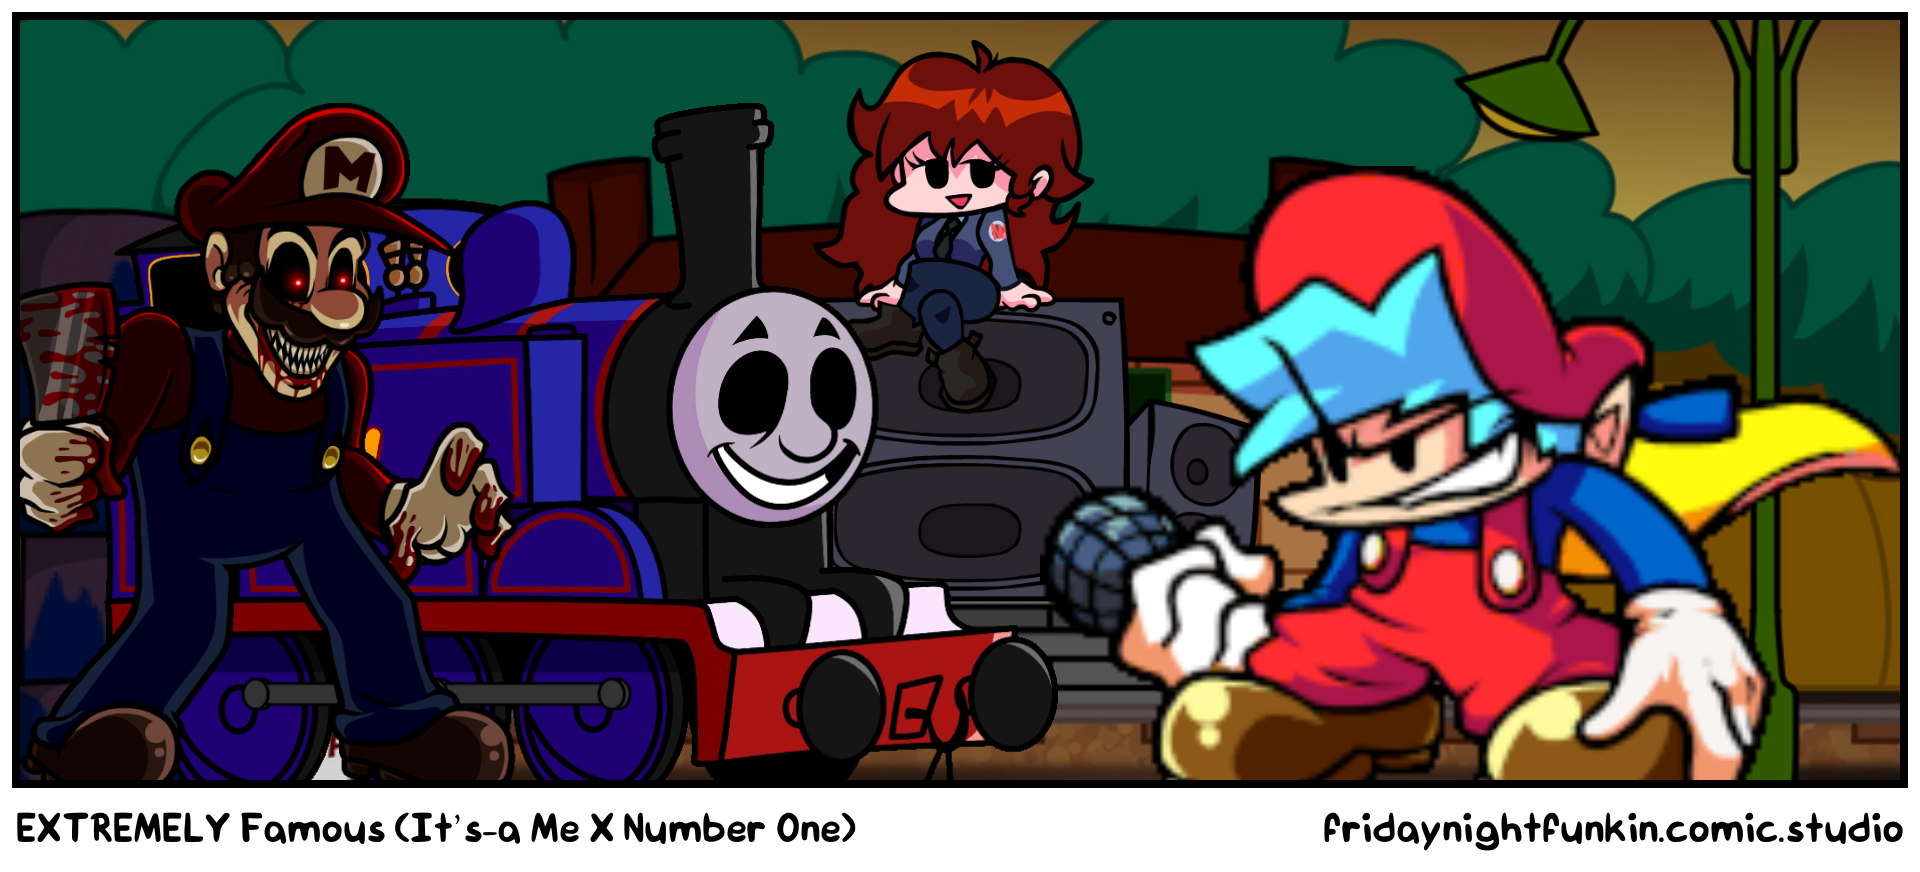 EXTREMELY Famous (It’s-a Me X Number One)